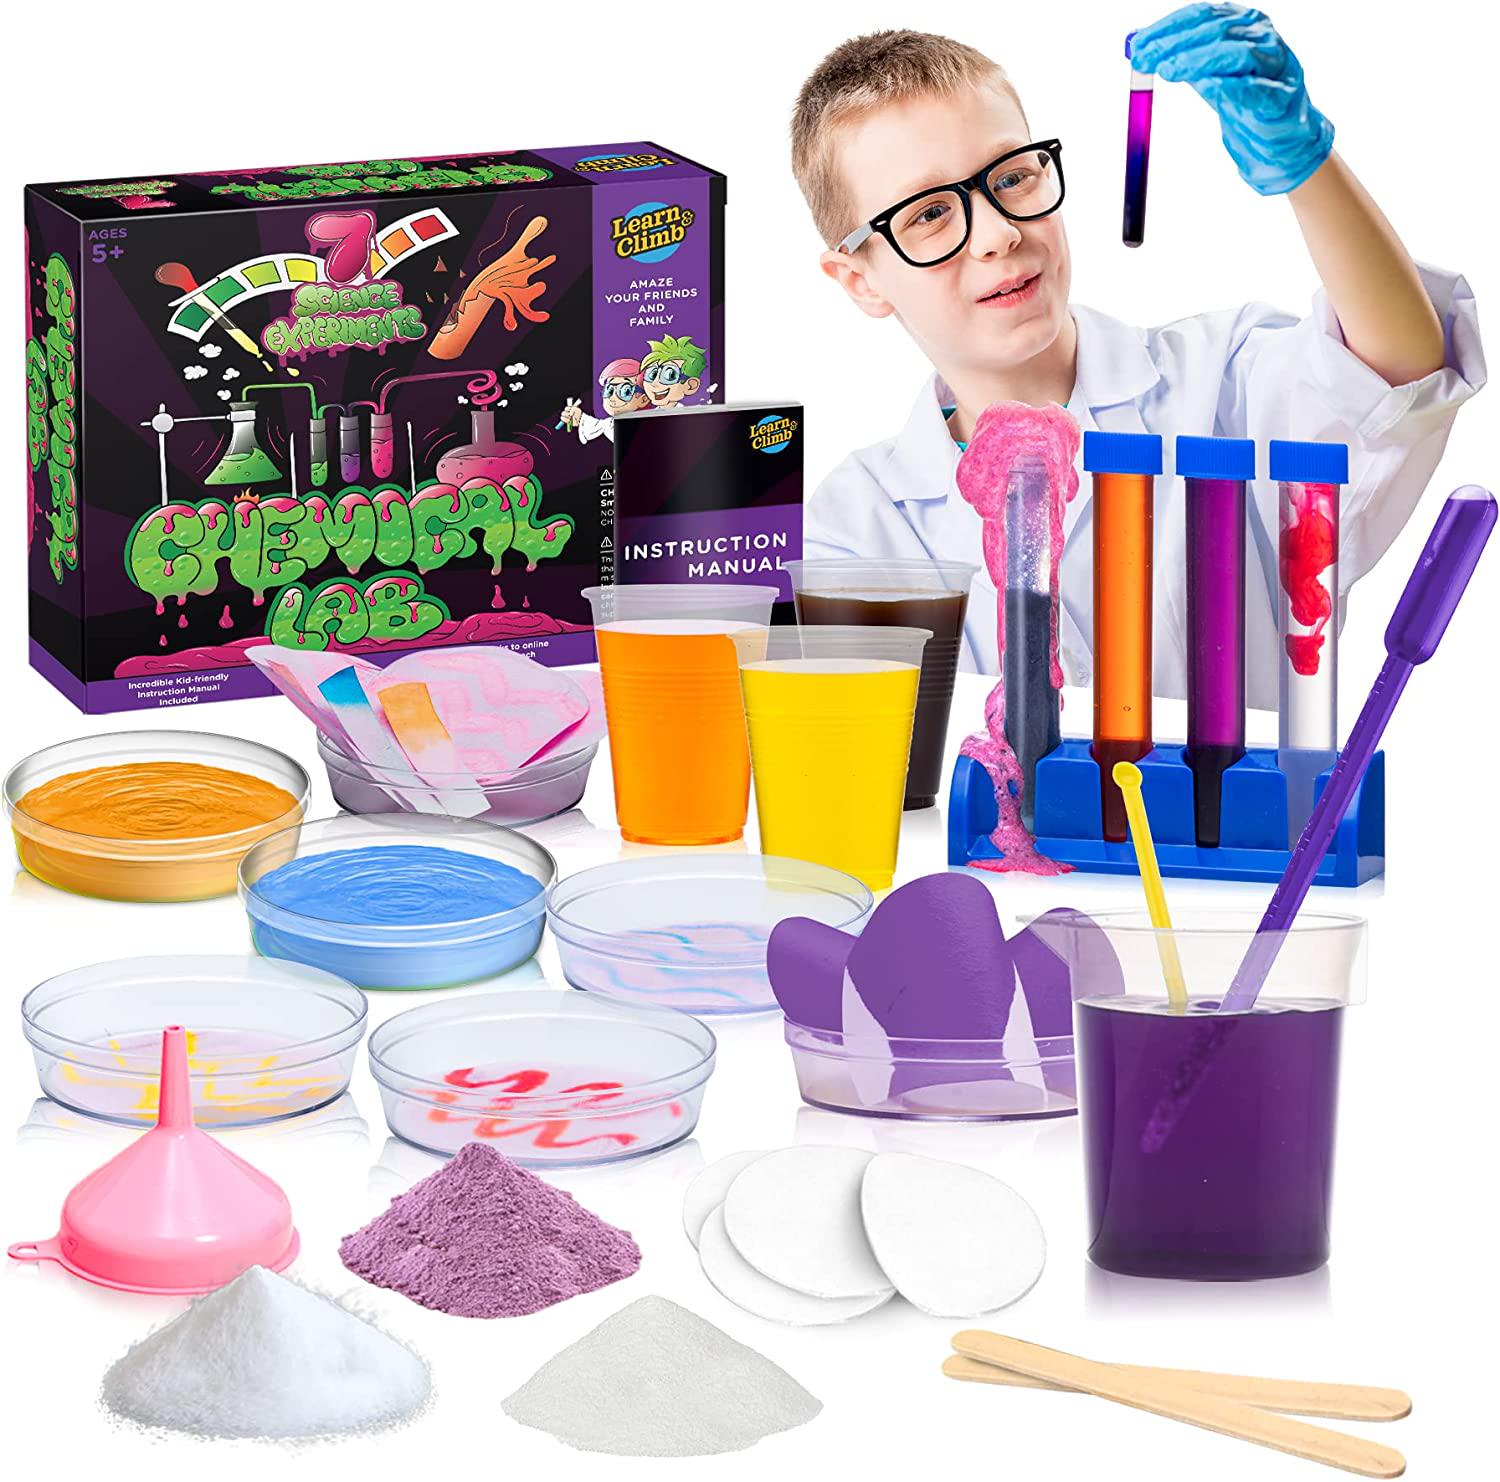 Learn & Climb, Learn and Climb Science Kits for Kids Age 5 Plus. 8 Chemistry Experiments, Step-by-Step Manual. Gift for Girls and Boys 5,6,7,8